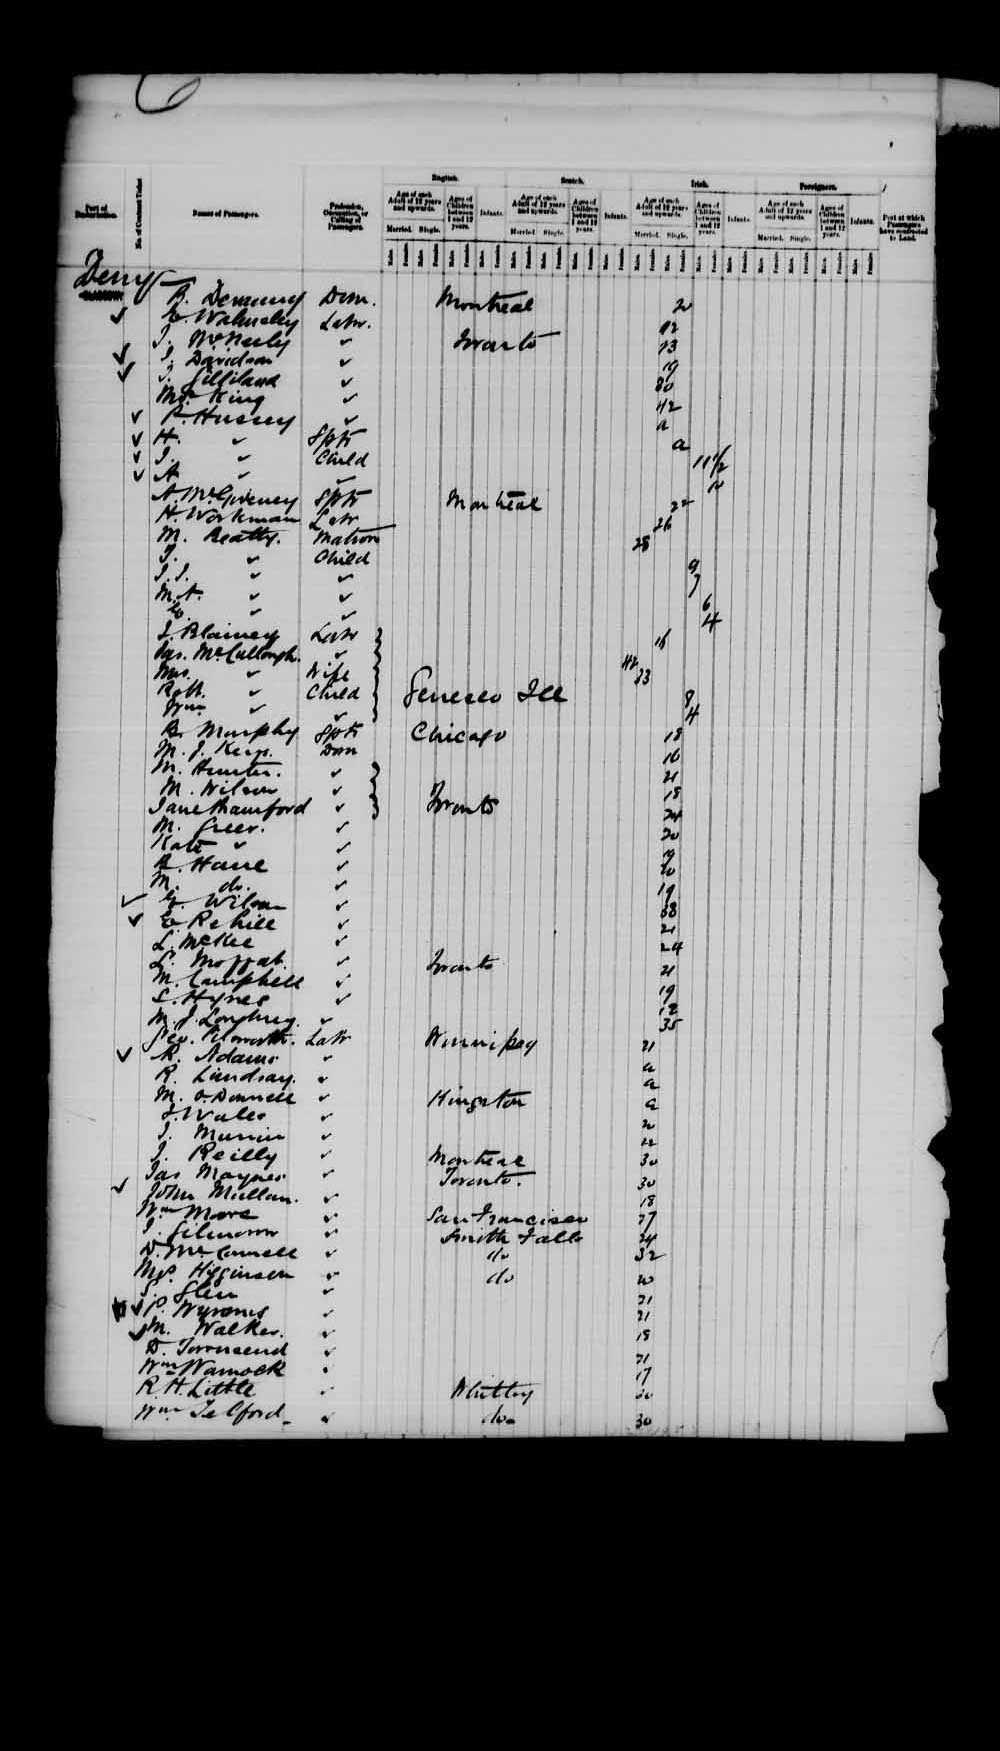 Digitized page of Passenger Lists for Image No.: e003542671